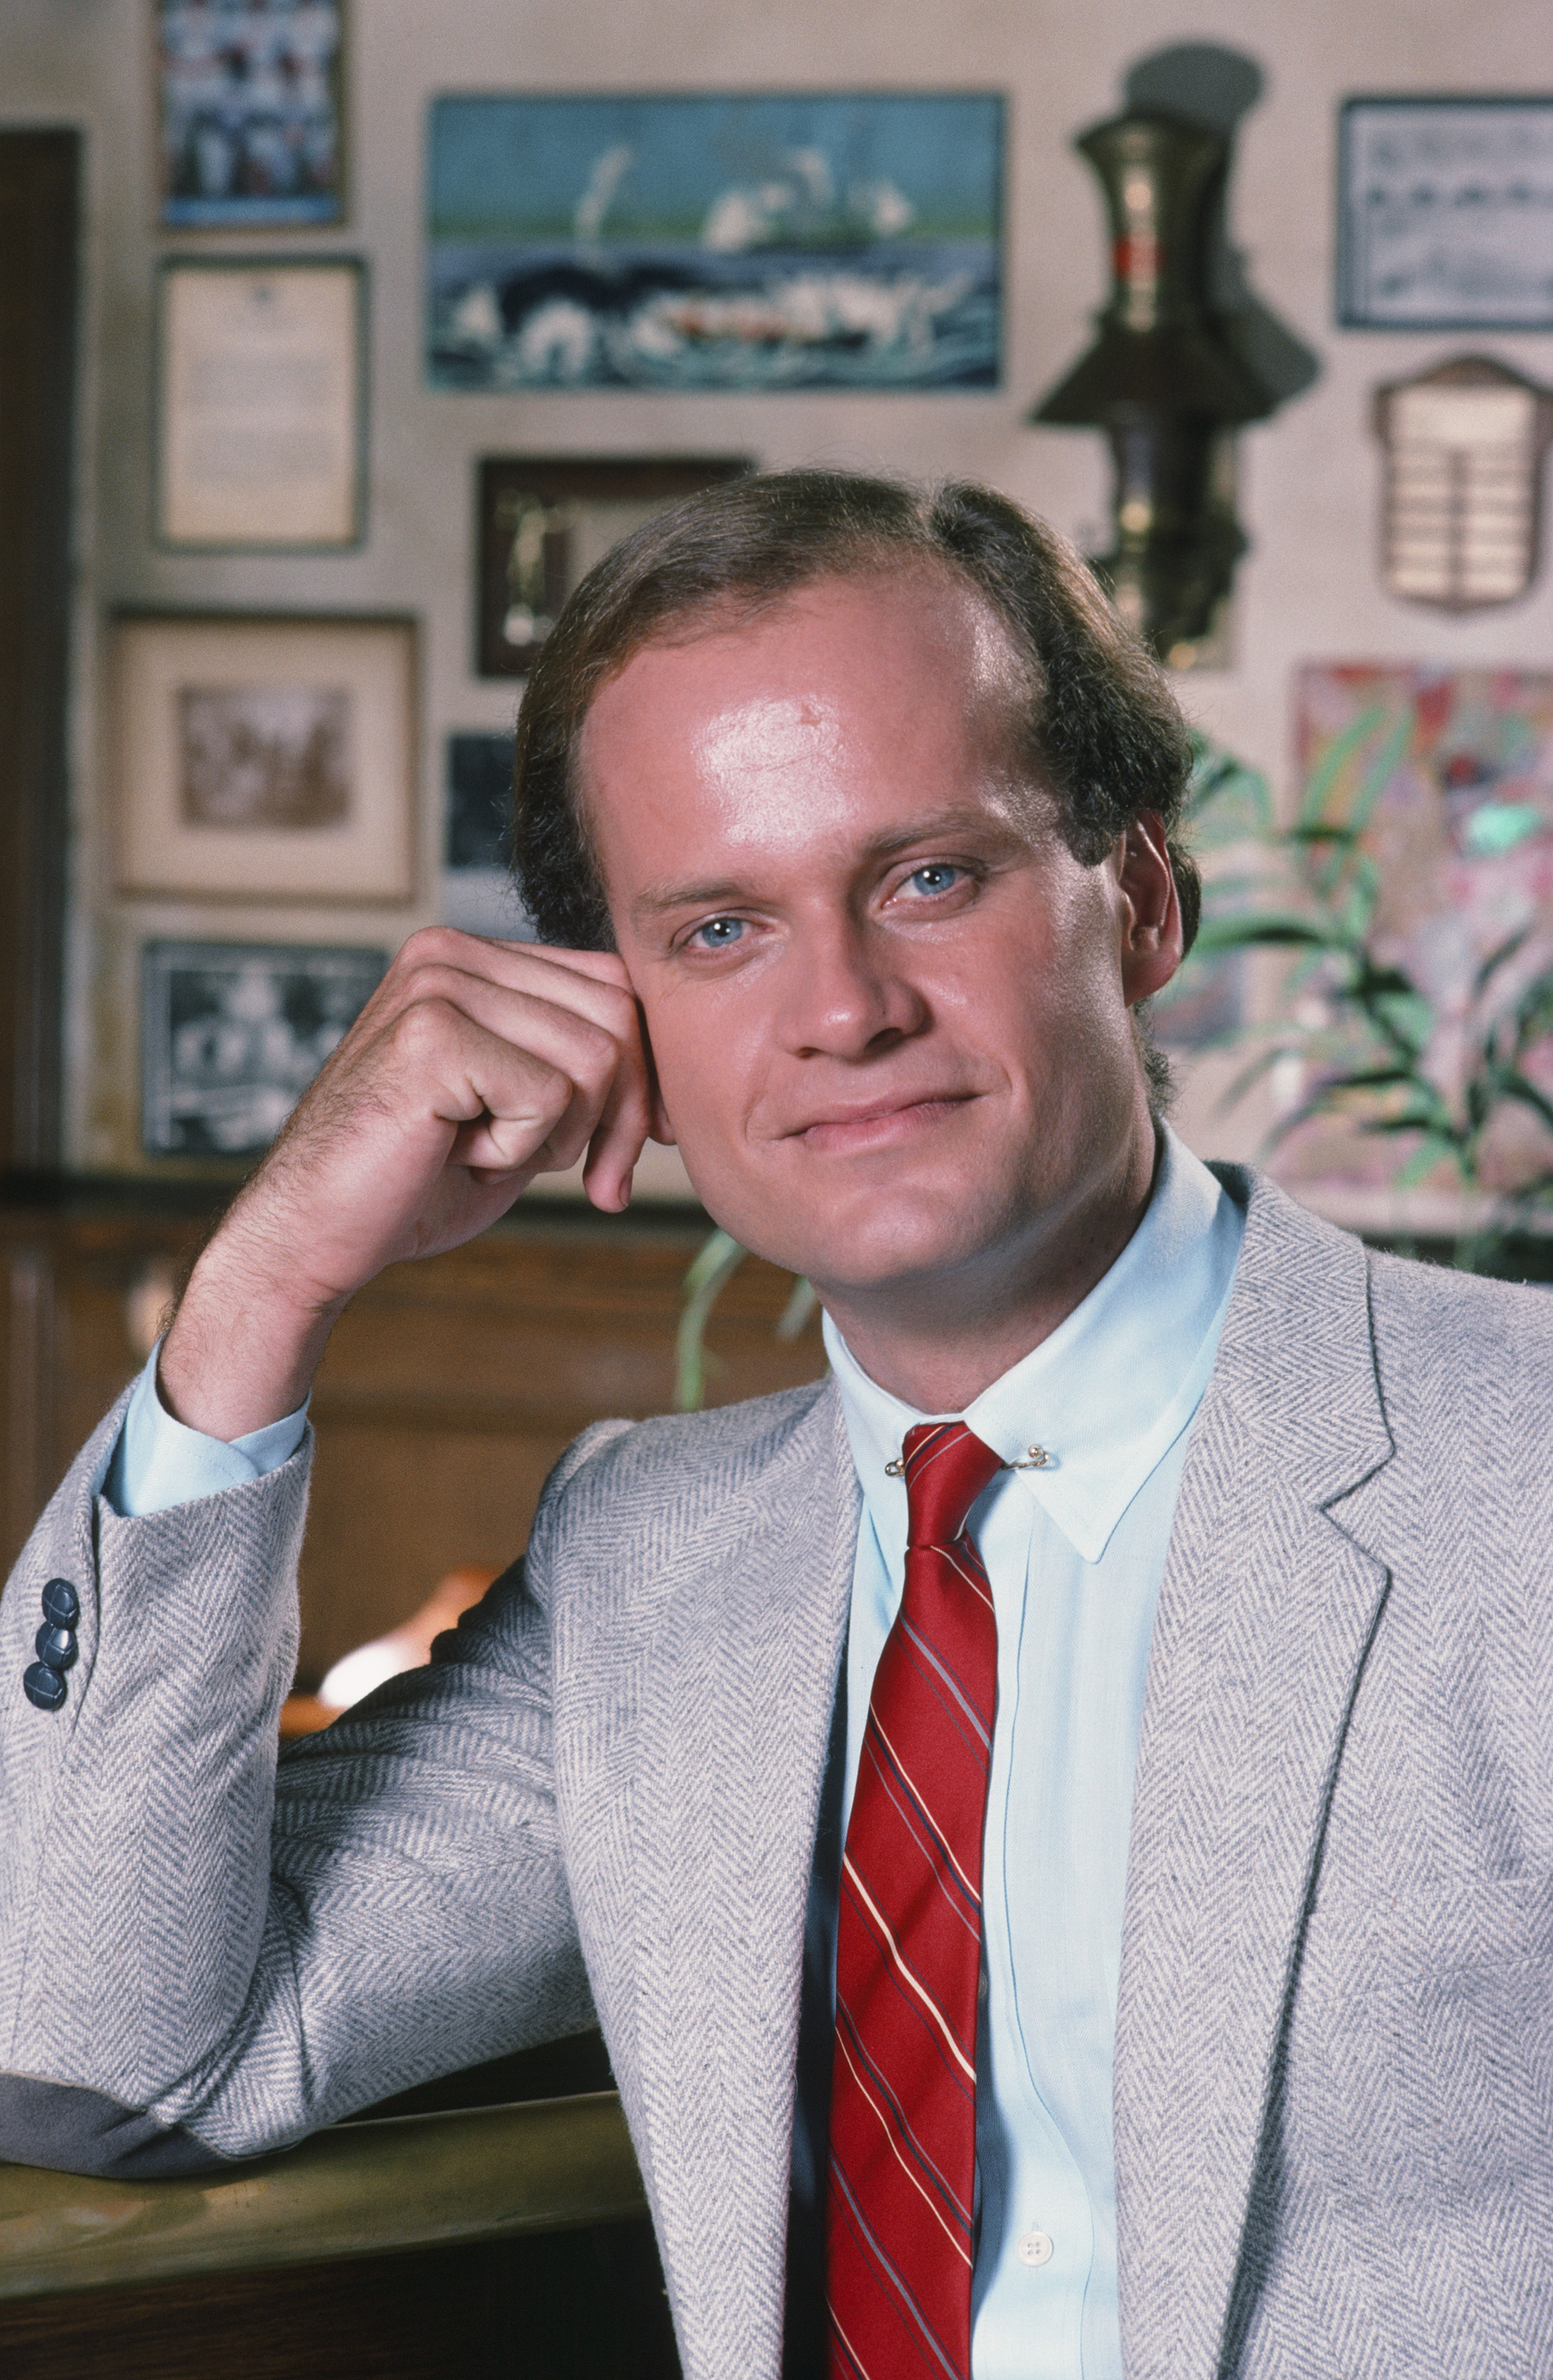 Kelsey Grammer on "Cheers" in an undated photo | Source: Getty Images